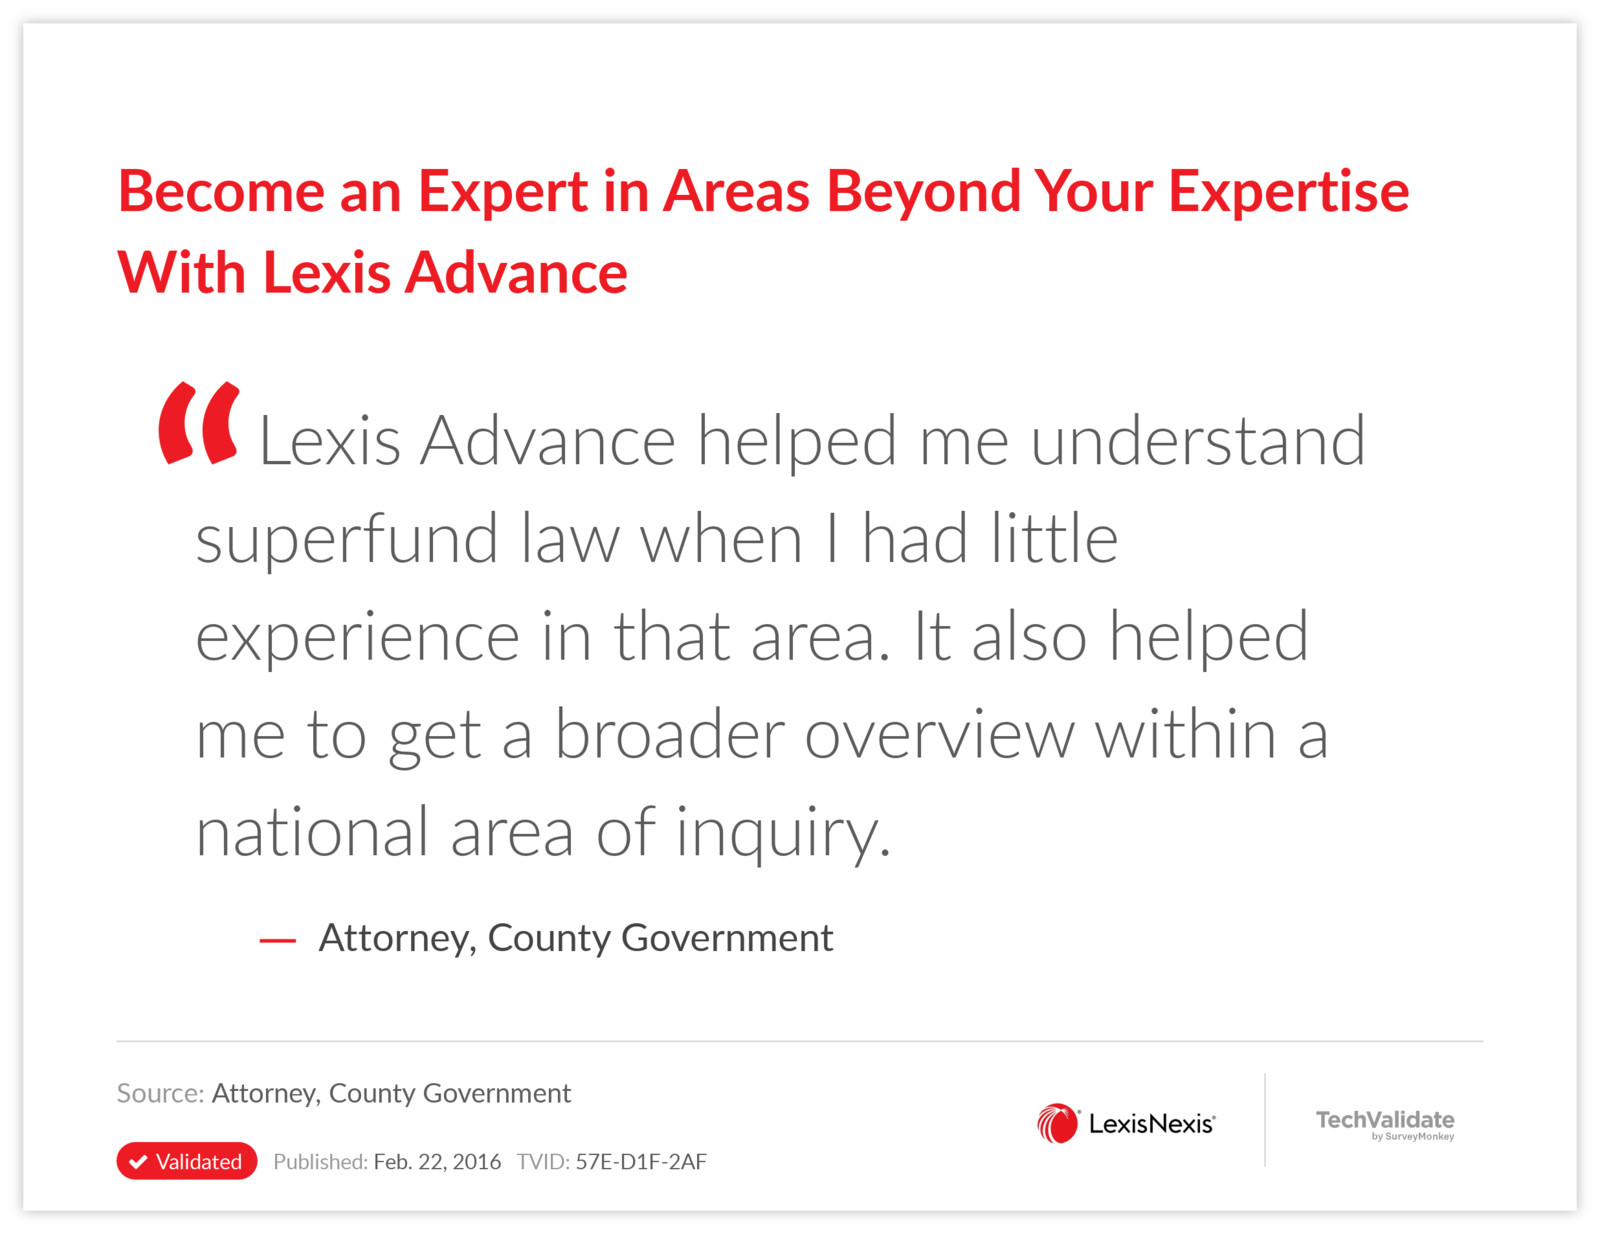 Become an Expert in Areas Beyond Your Expertise With Lexis Advance